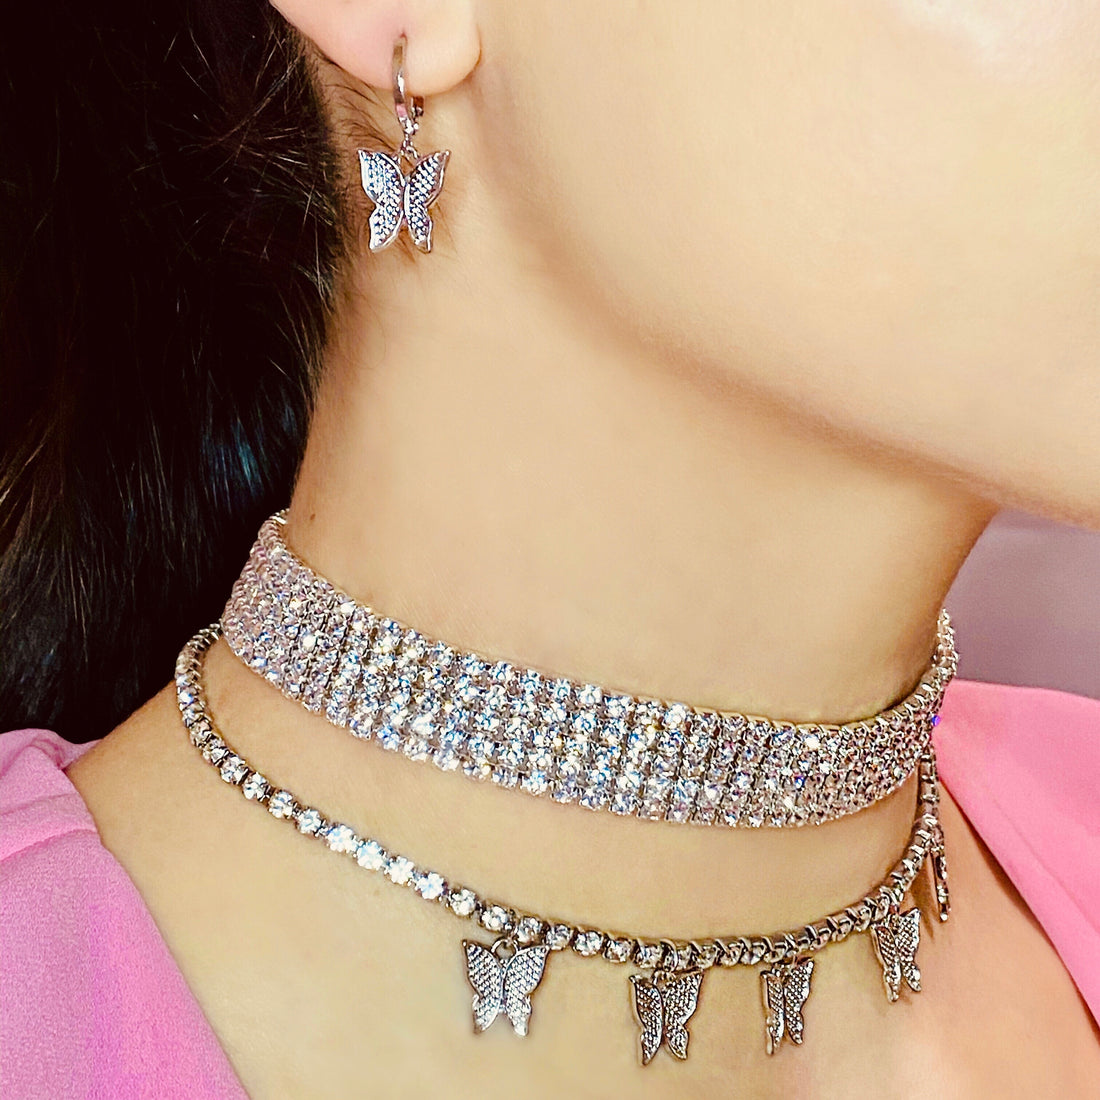 Be Iconic Choker - Darlings Jewelry | Express Yourself Through Bling!